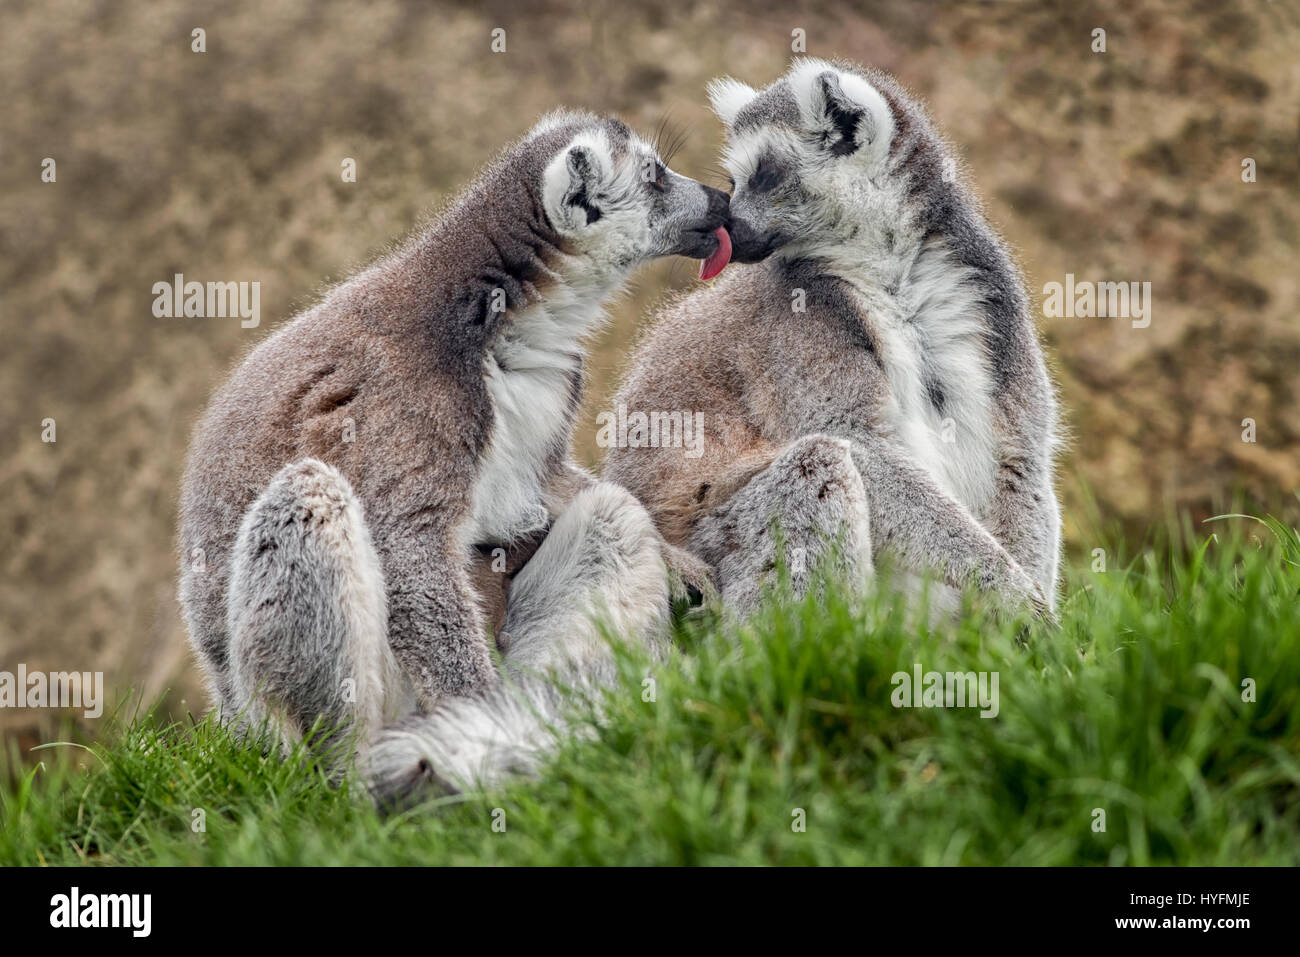 A pair of ring tailed lemurs sitting on grass one licking the other as if kissing Stock Photo